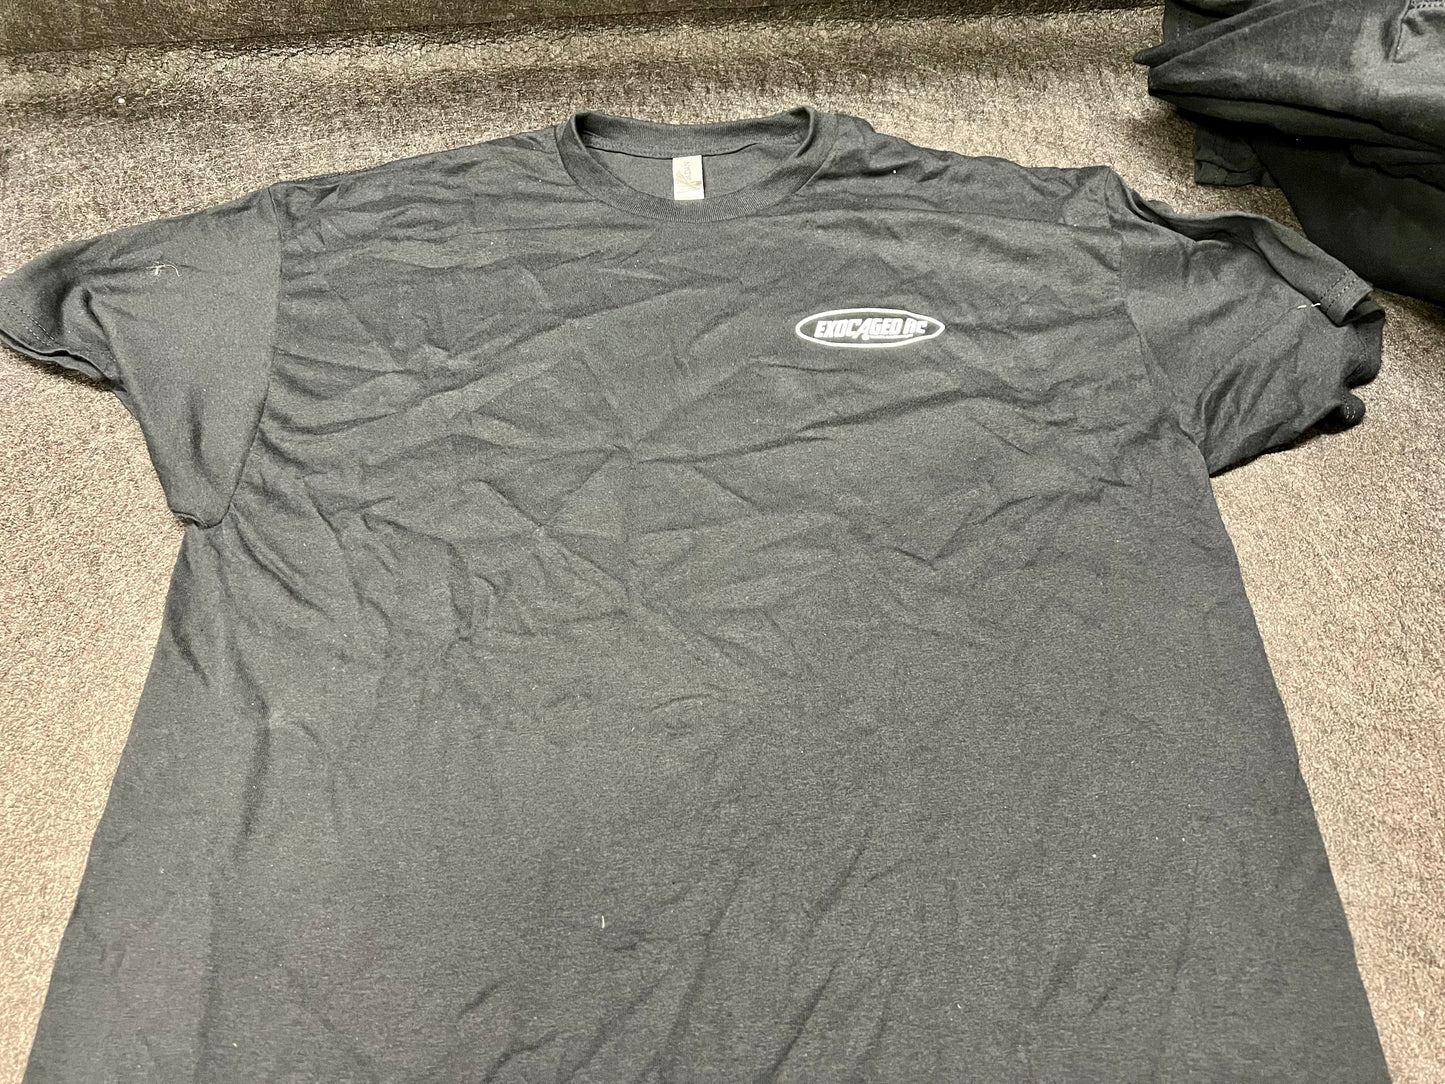 Official Exocaged RC XL Shirts